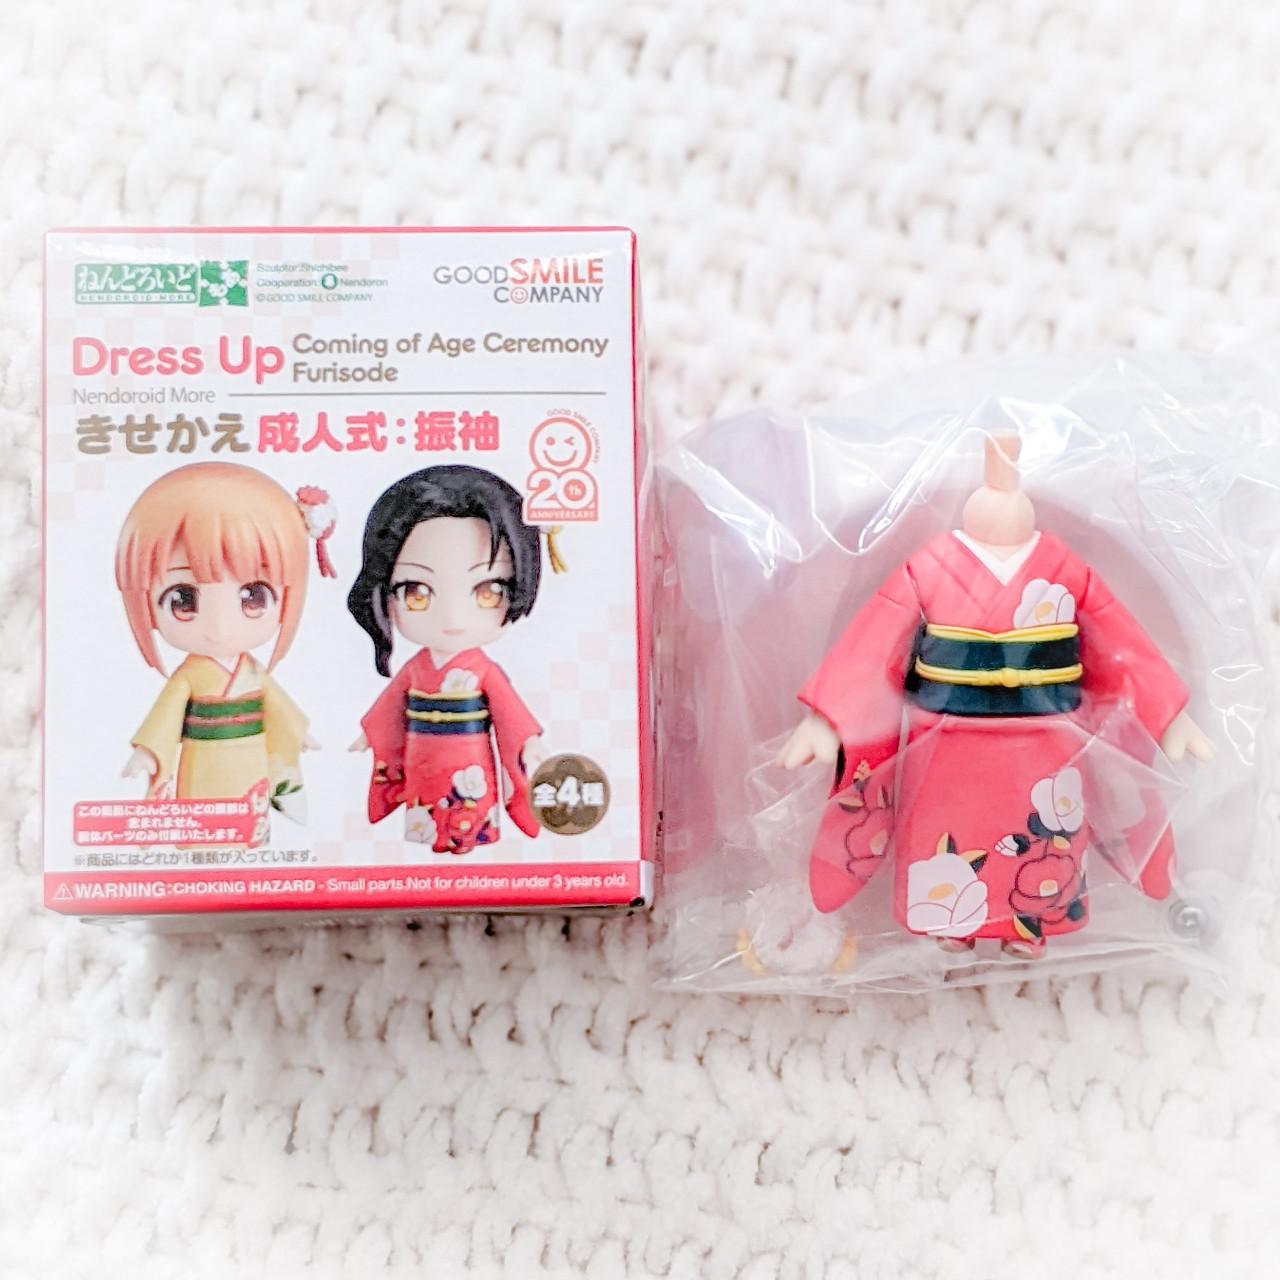 Nendoroid More Dress Up Outfit - Coming of Age Ceremony Kimono Furisode (RED)